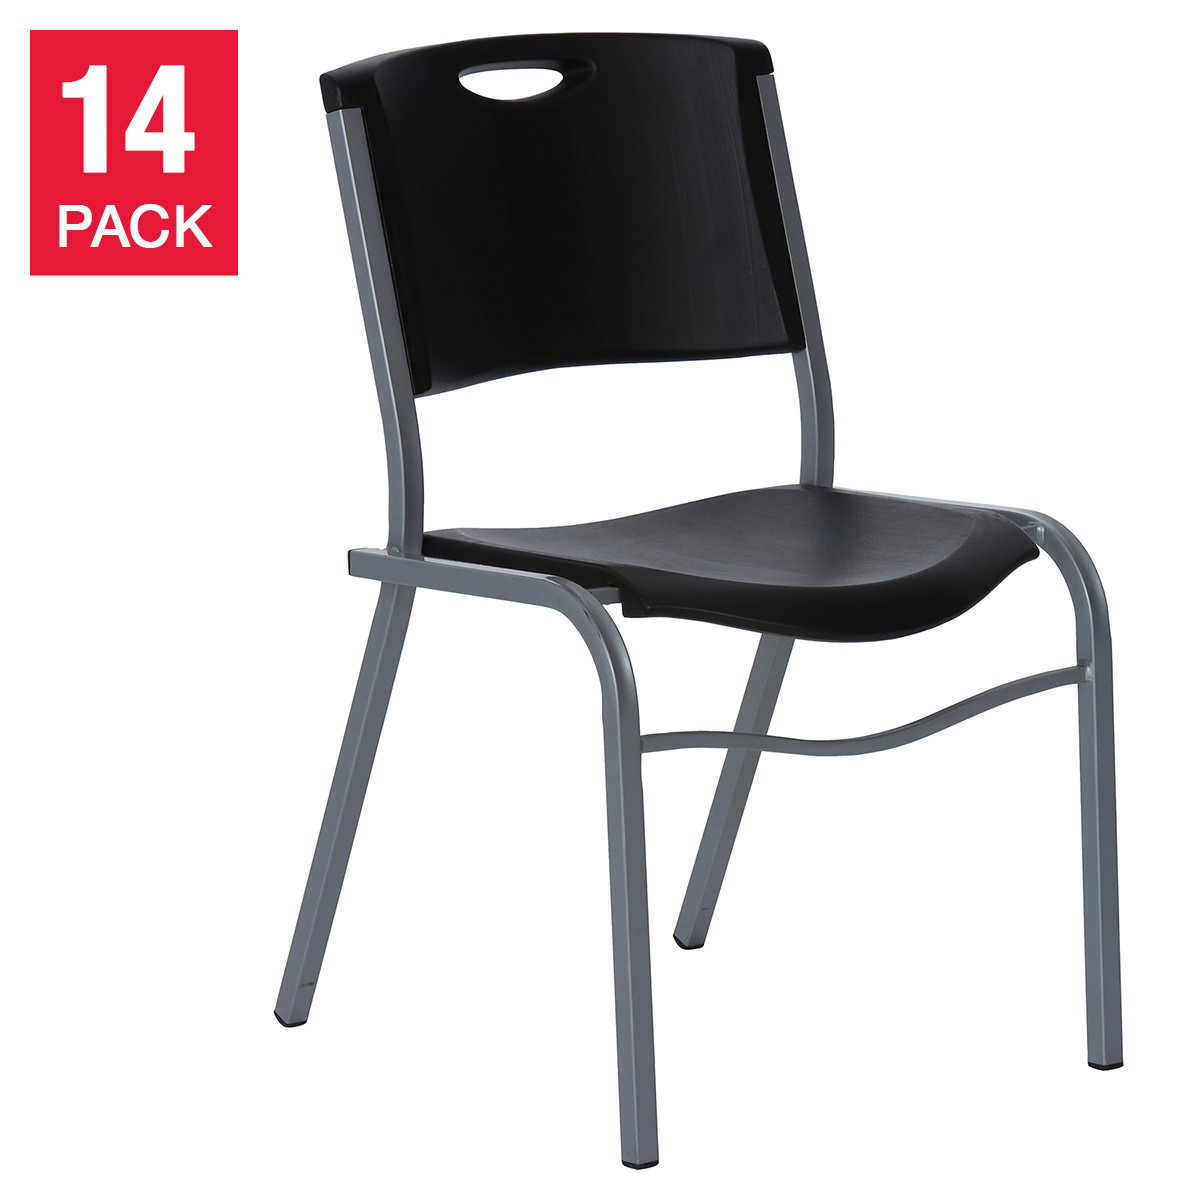 Lifetime Stacking Chairs